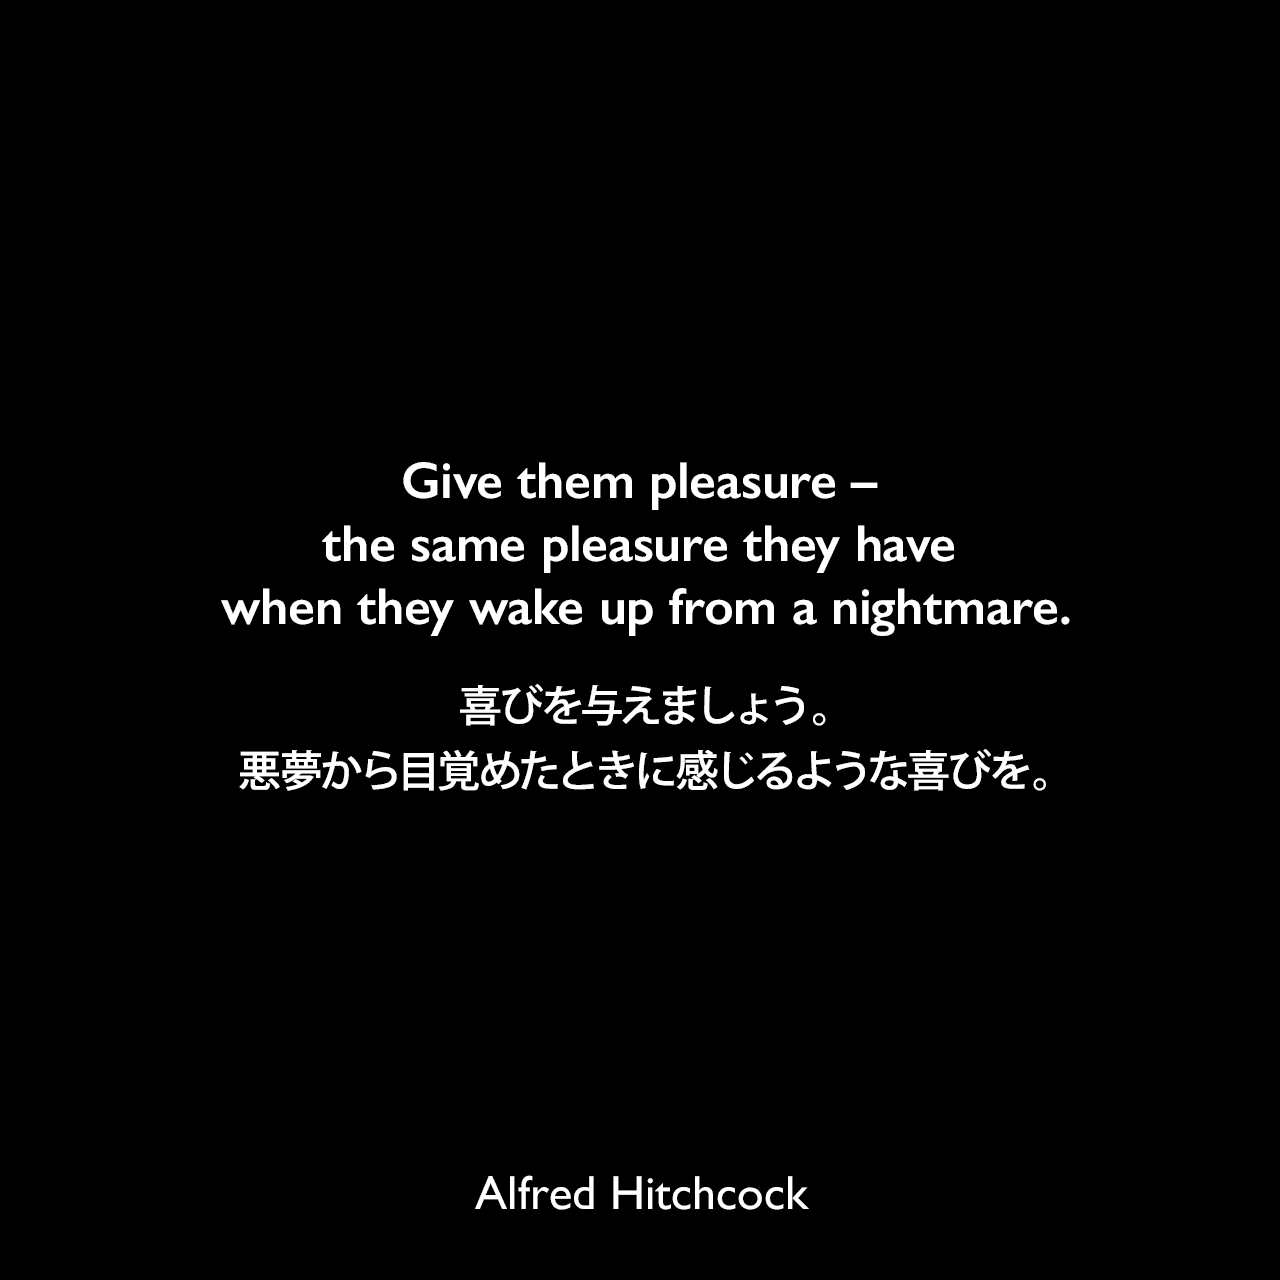 Give them pleasure – the same pleasure they have when they wake up from a nightmare.喜びを与えましょう。悪夢から目覚めたときに感じるような喜びを。- 1974年8月 アメリカニュージャージー州の新聞「Asbury Park Press」よりAlfred Hitchcock